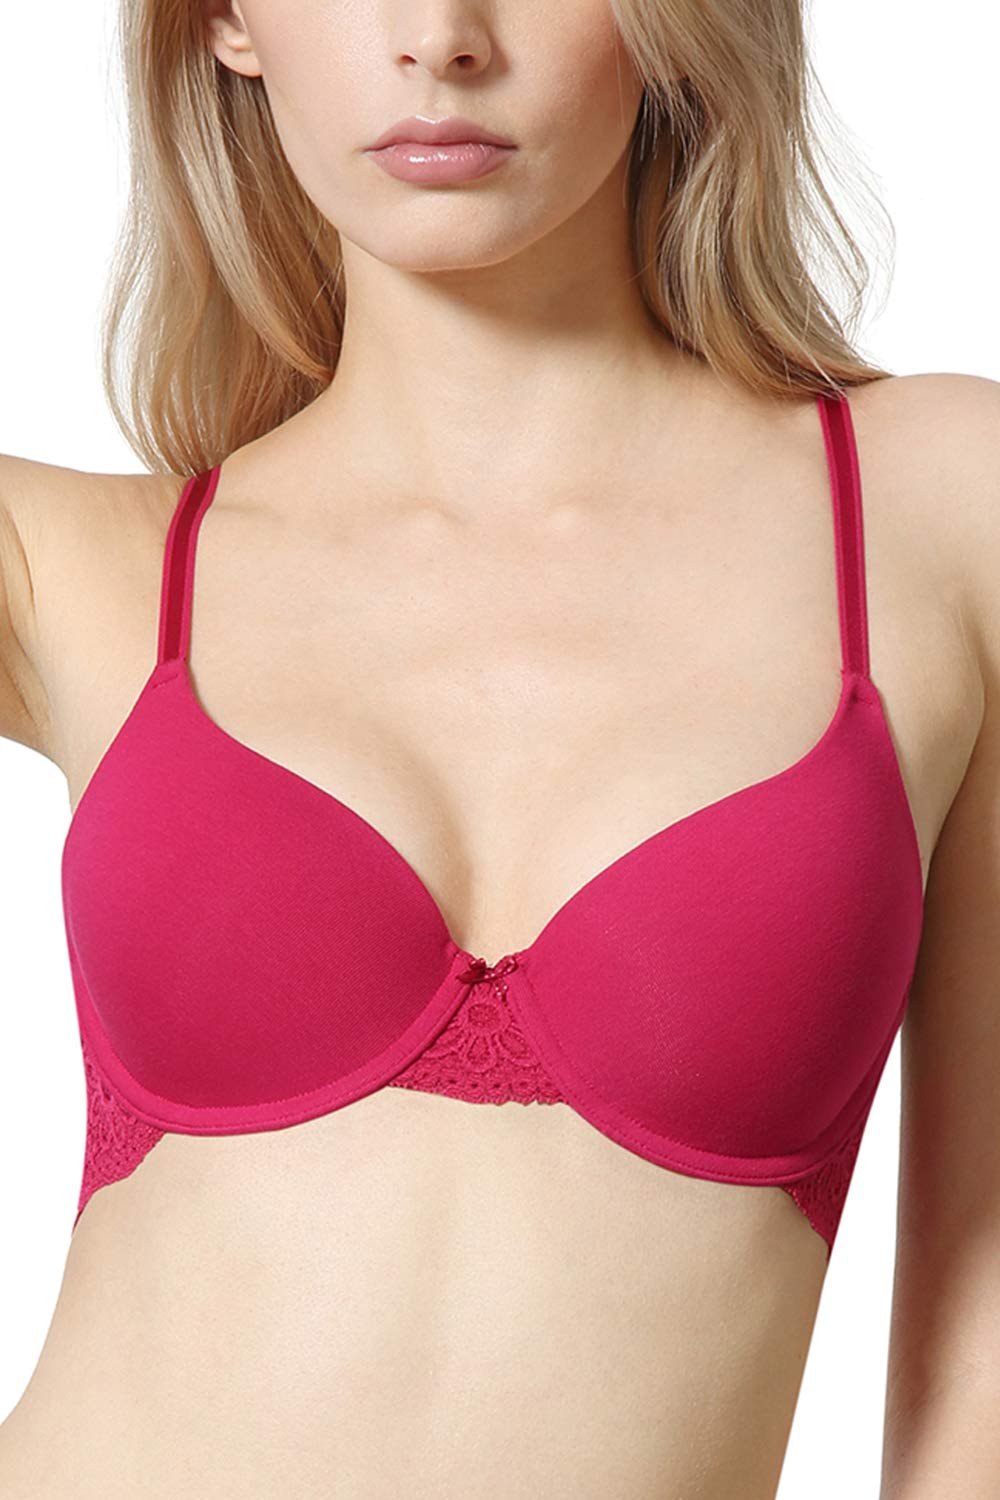 Amante 34F Support Bra Price Starting From Rs 660. Find Verified Sellers in  Wayanad - JdMart